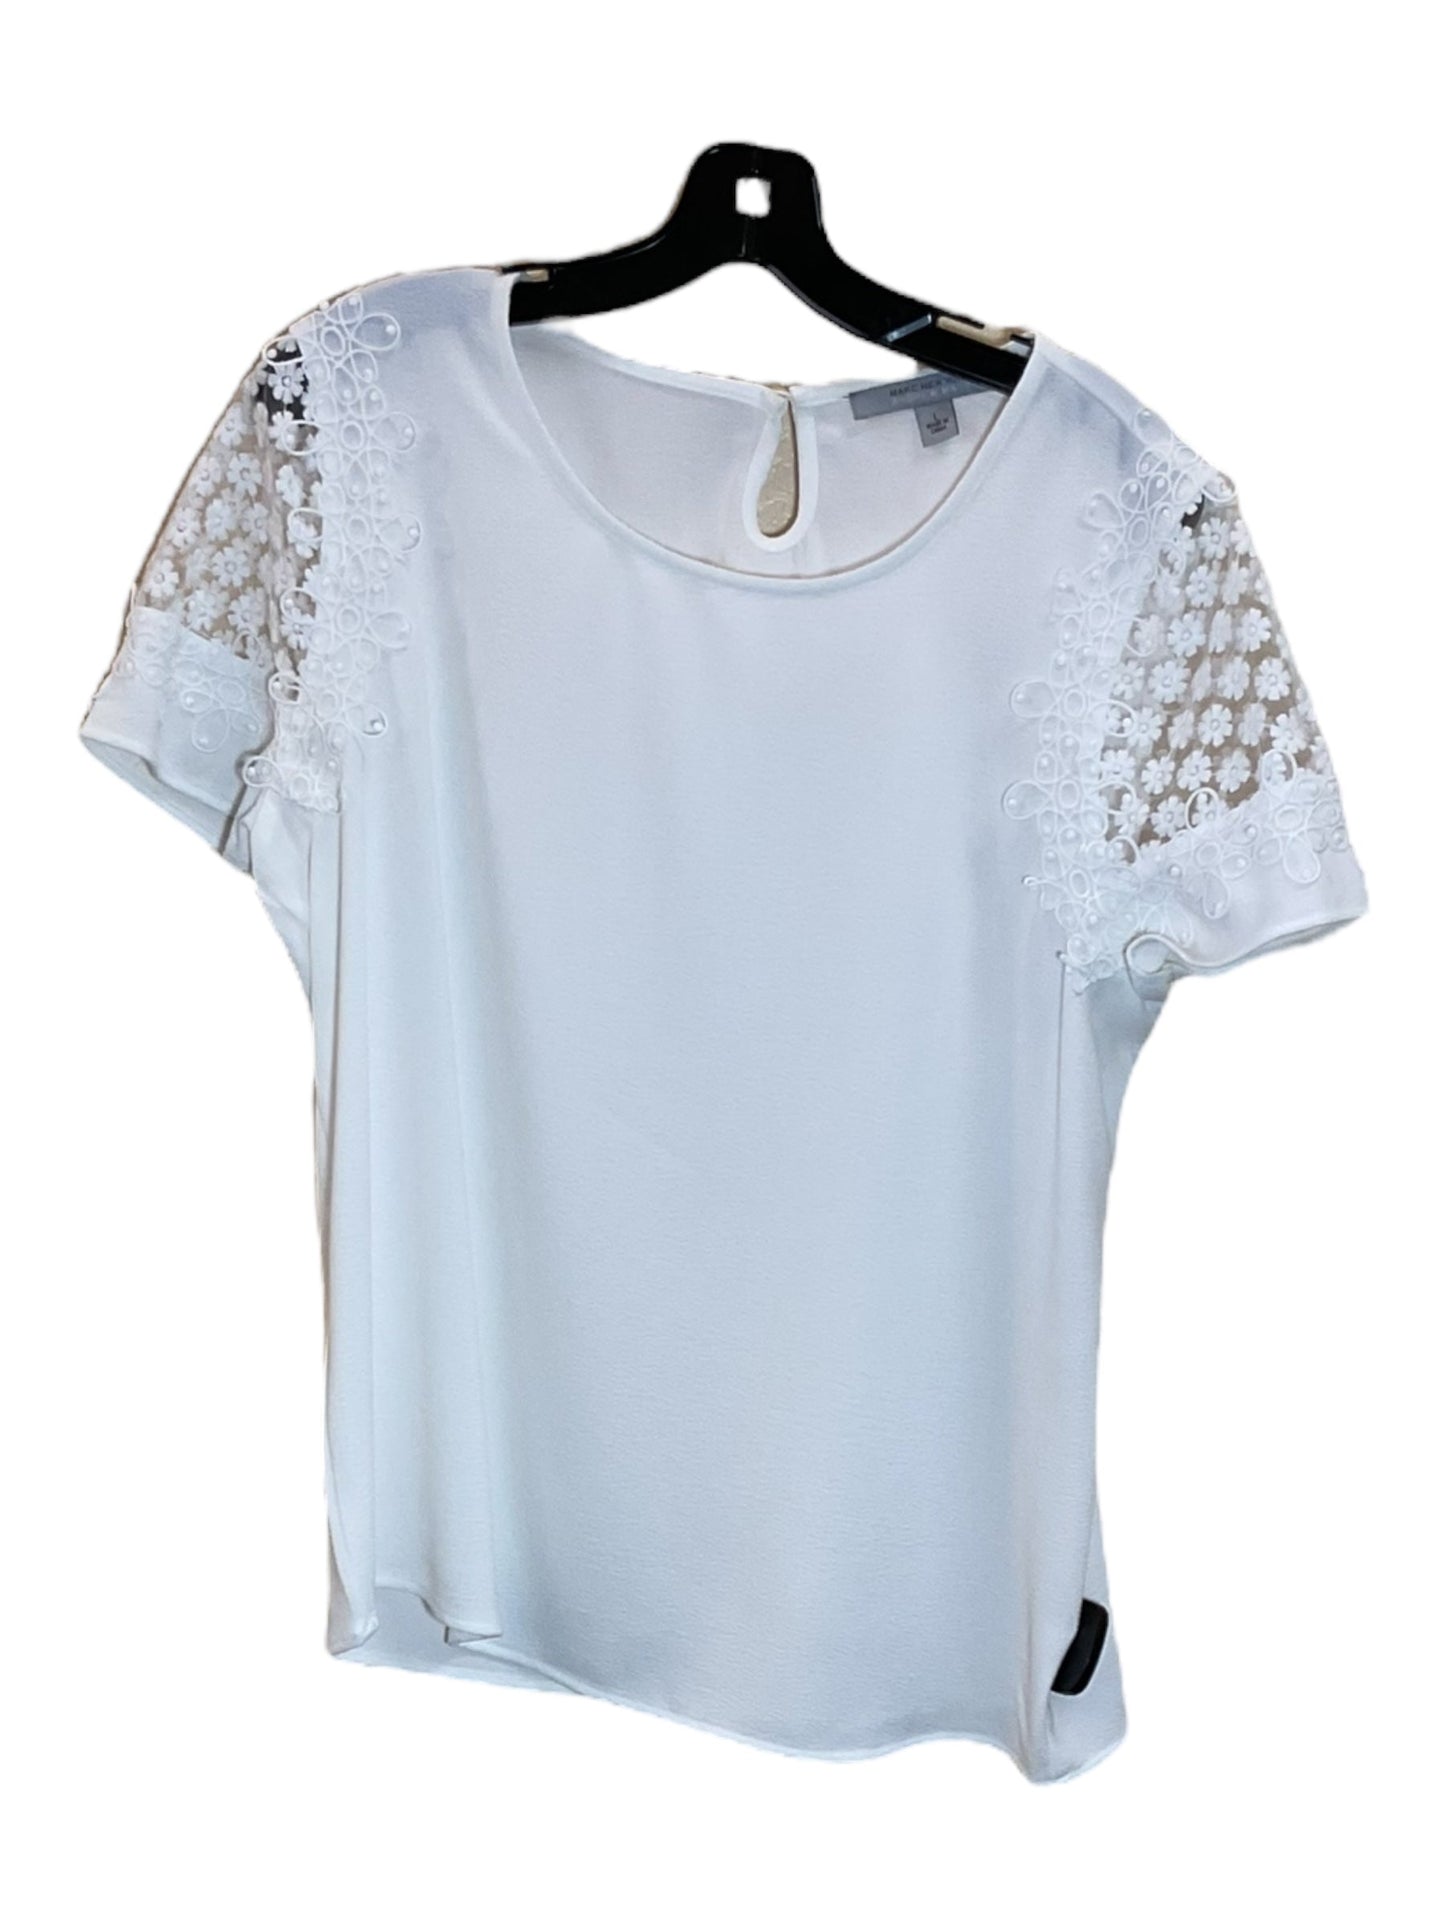 White Top Short Sleeve Marc New York, Size L